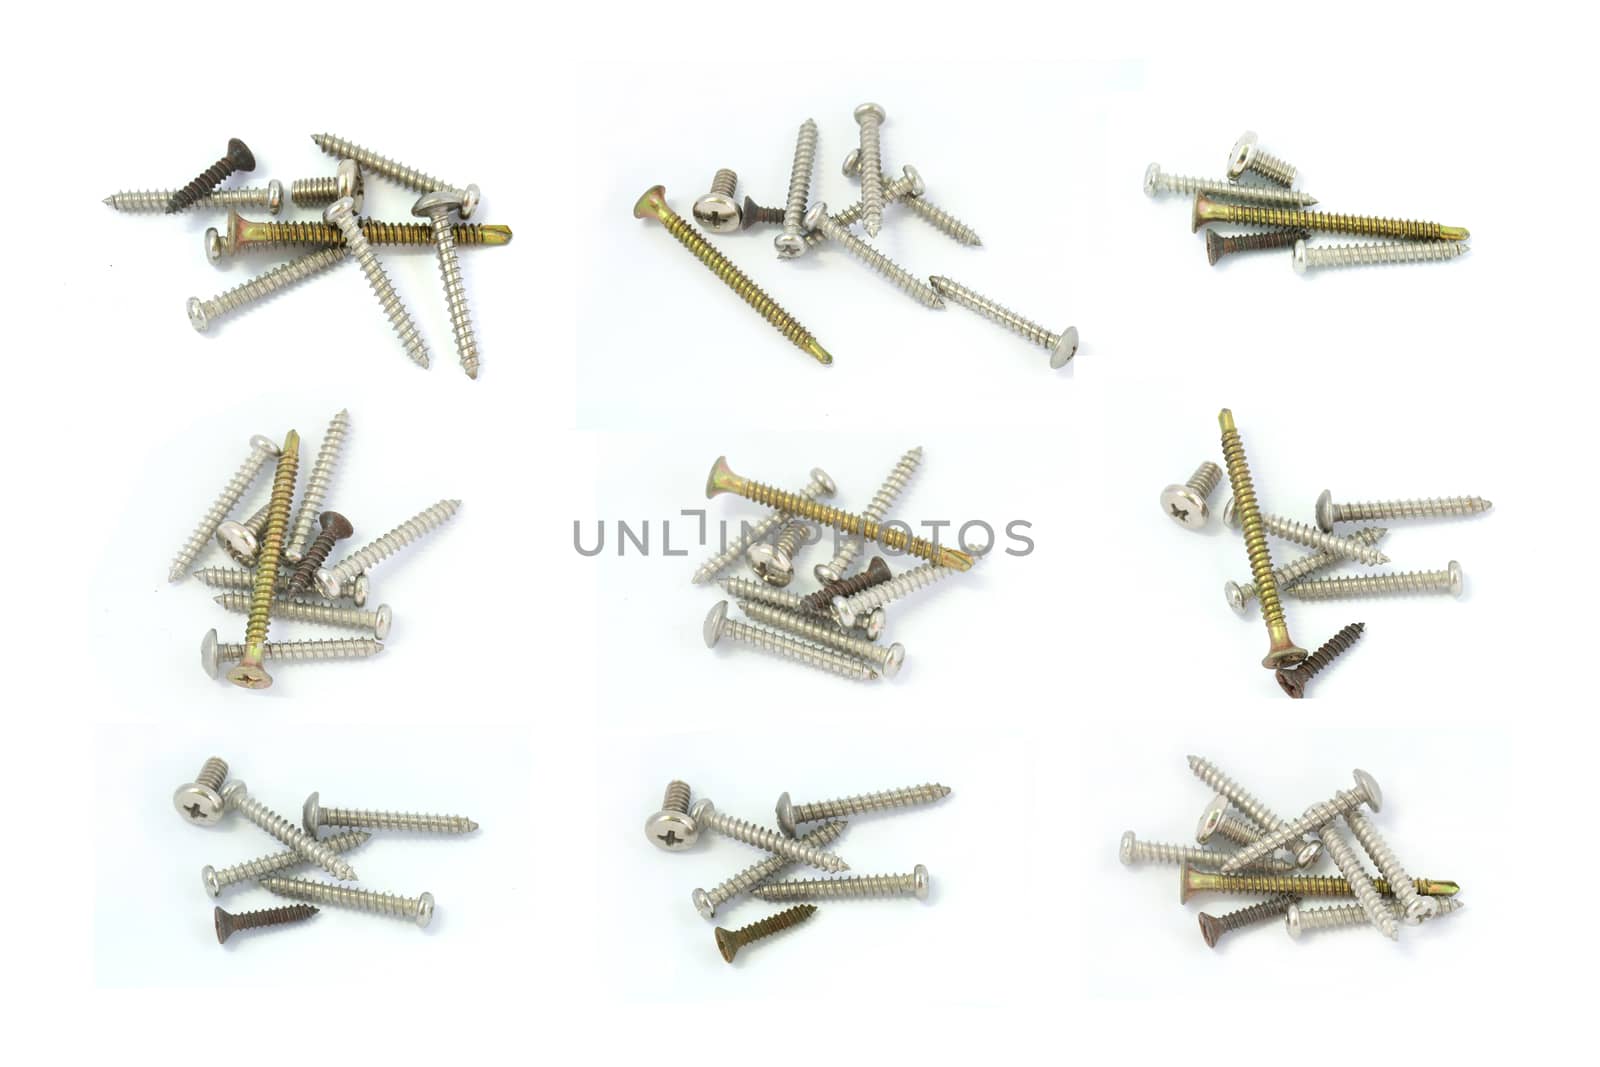 Six shots of many different screws on white background